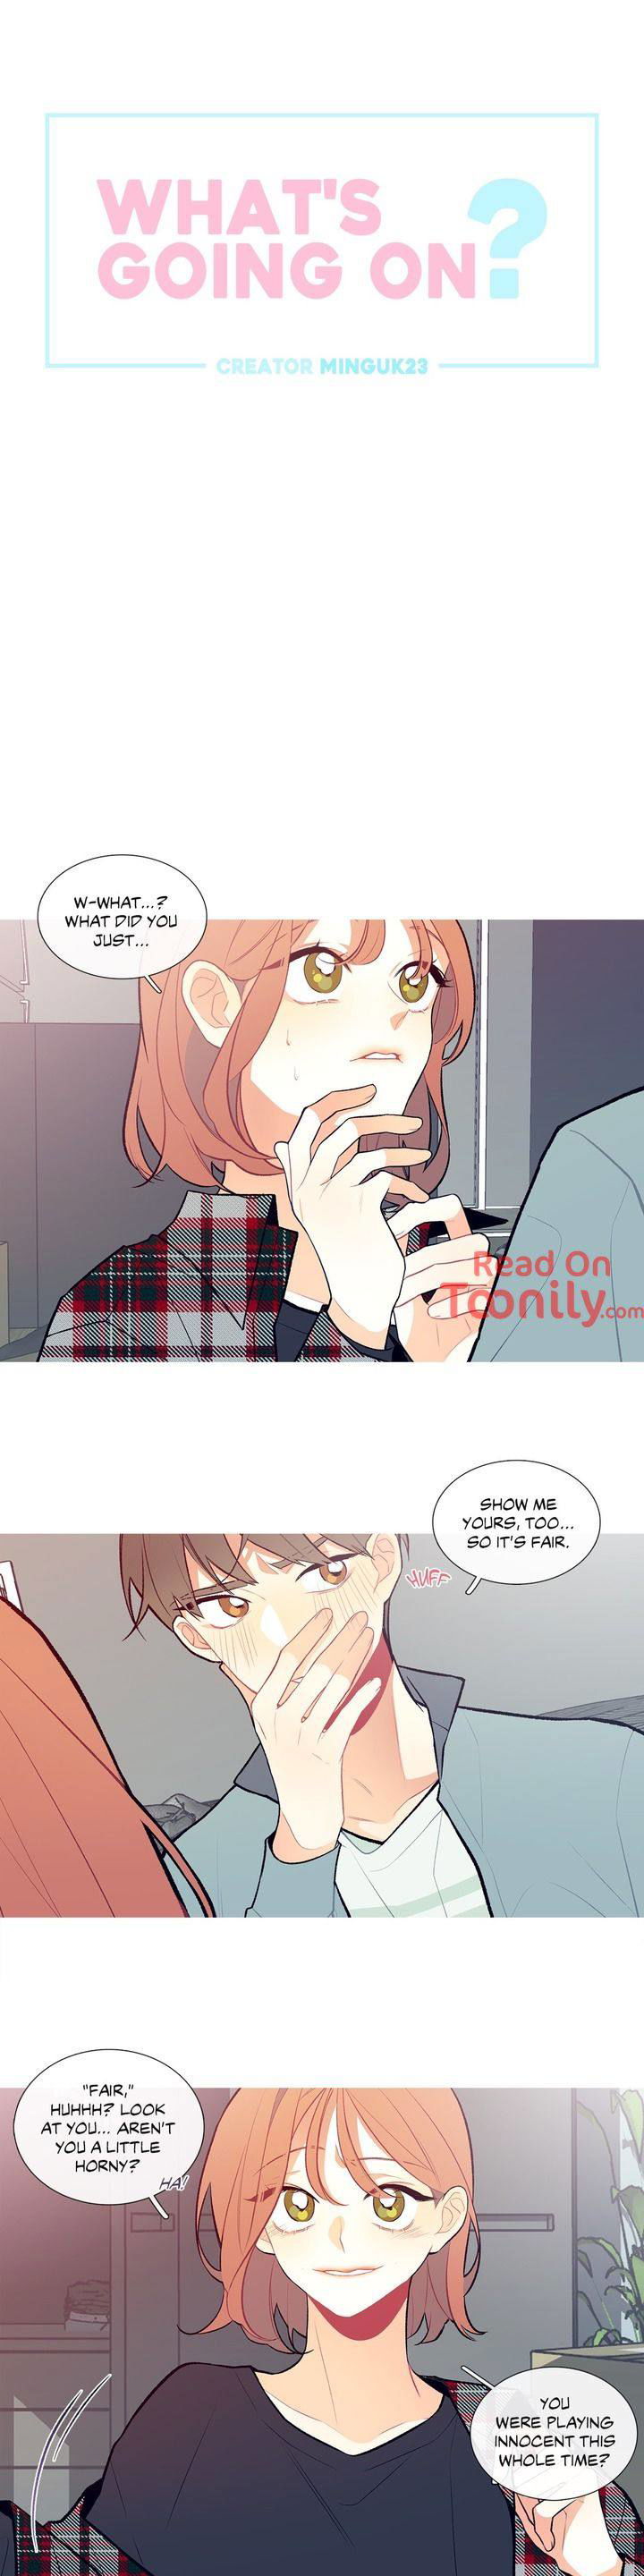 whats-going-on-chap-4-1